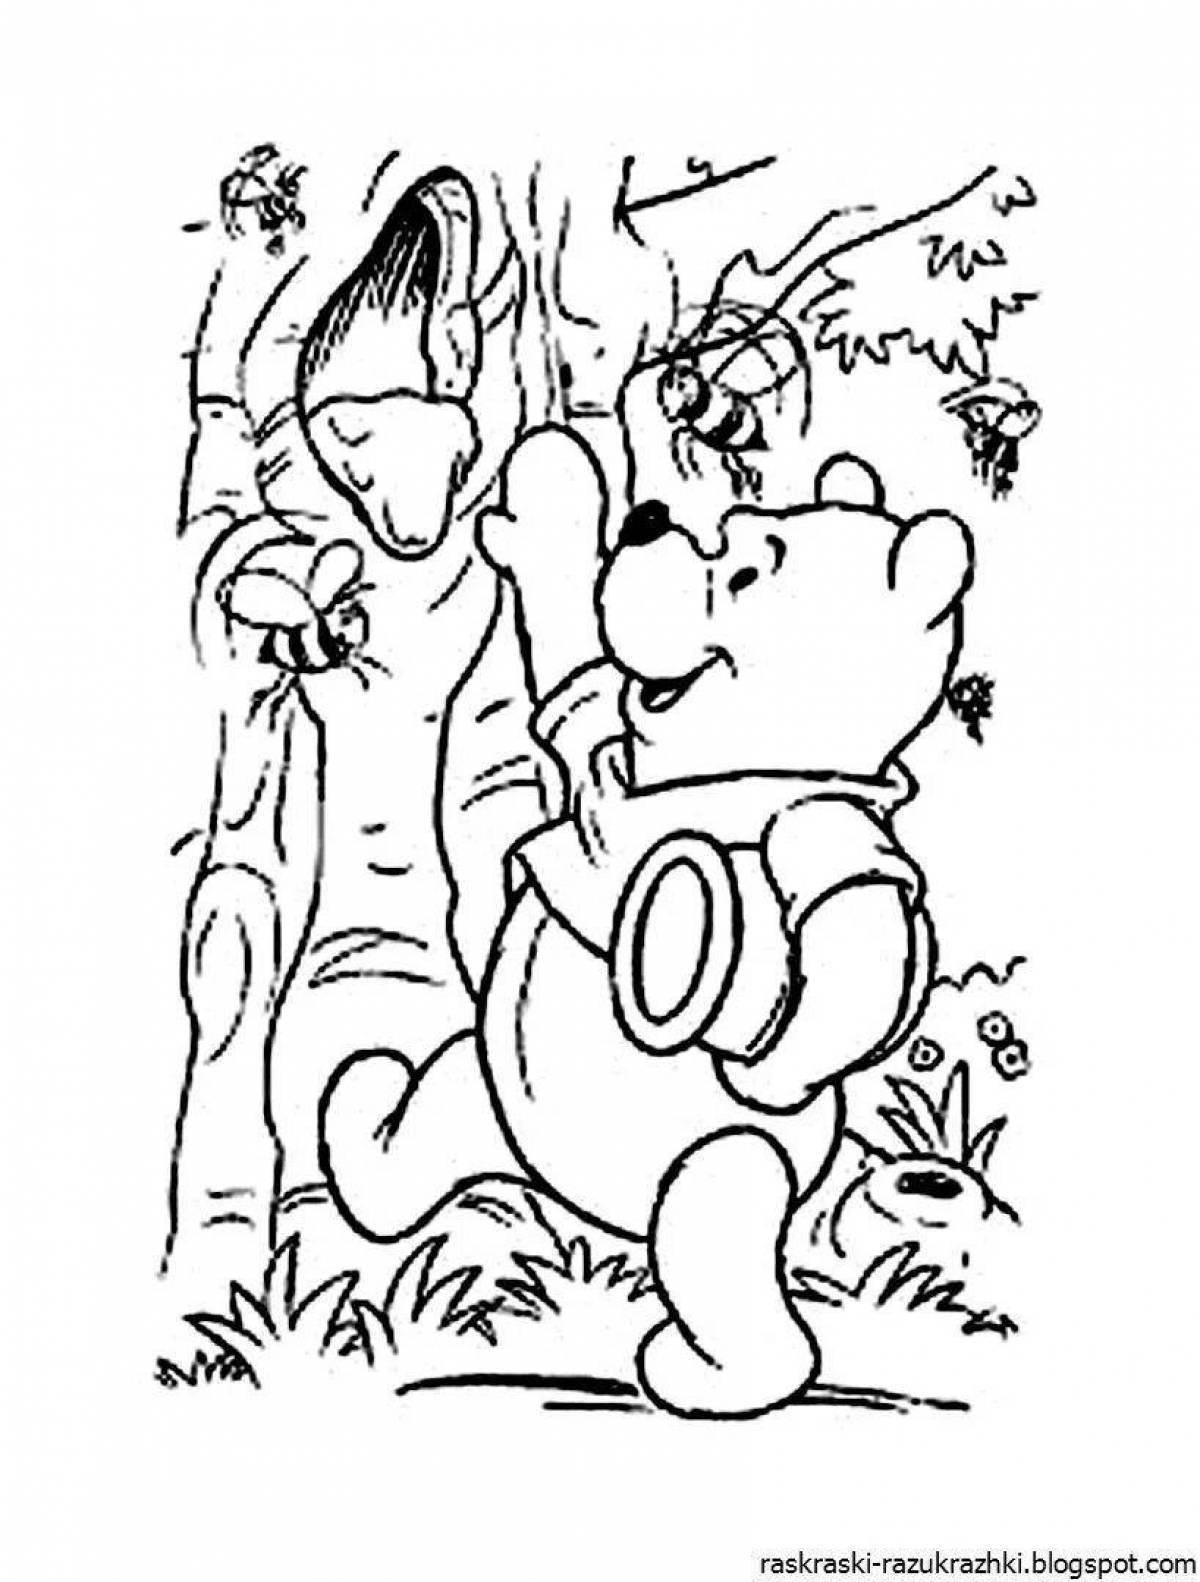 Color-frenzy cartoon kids coloring page